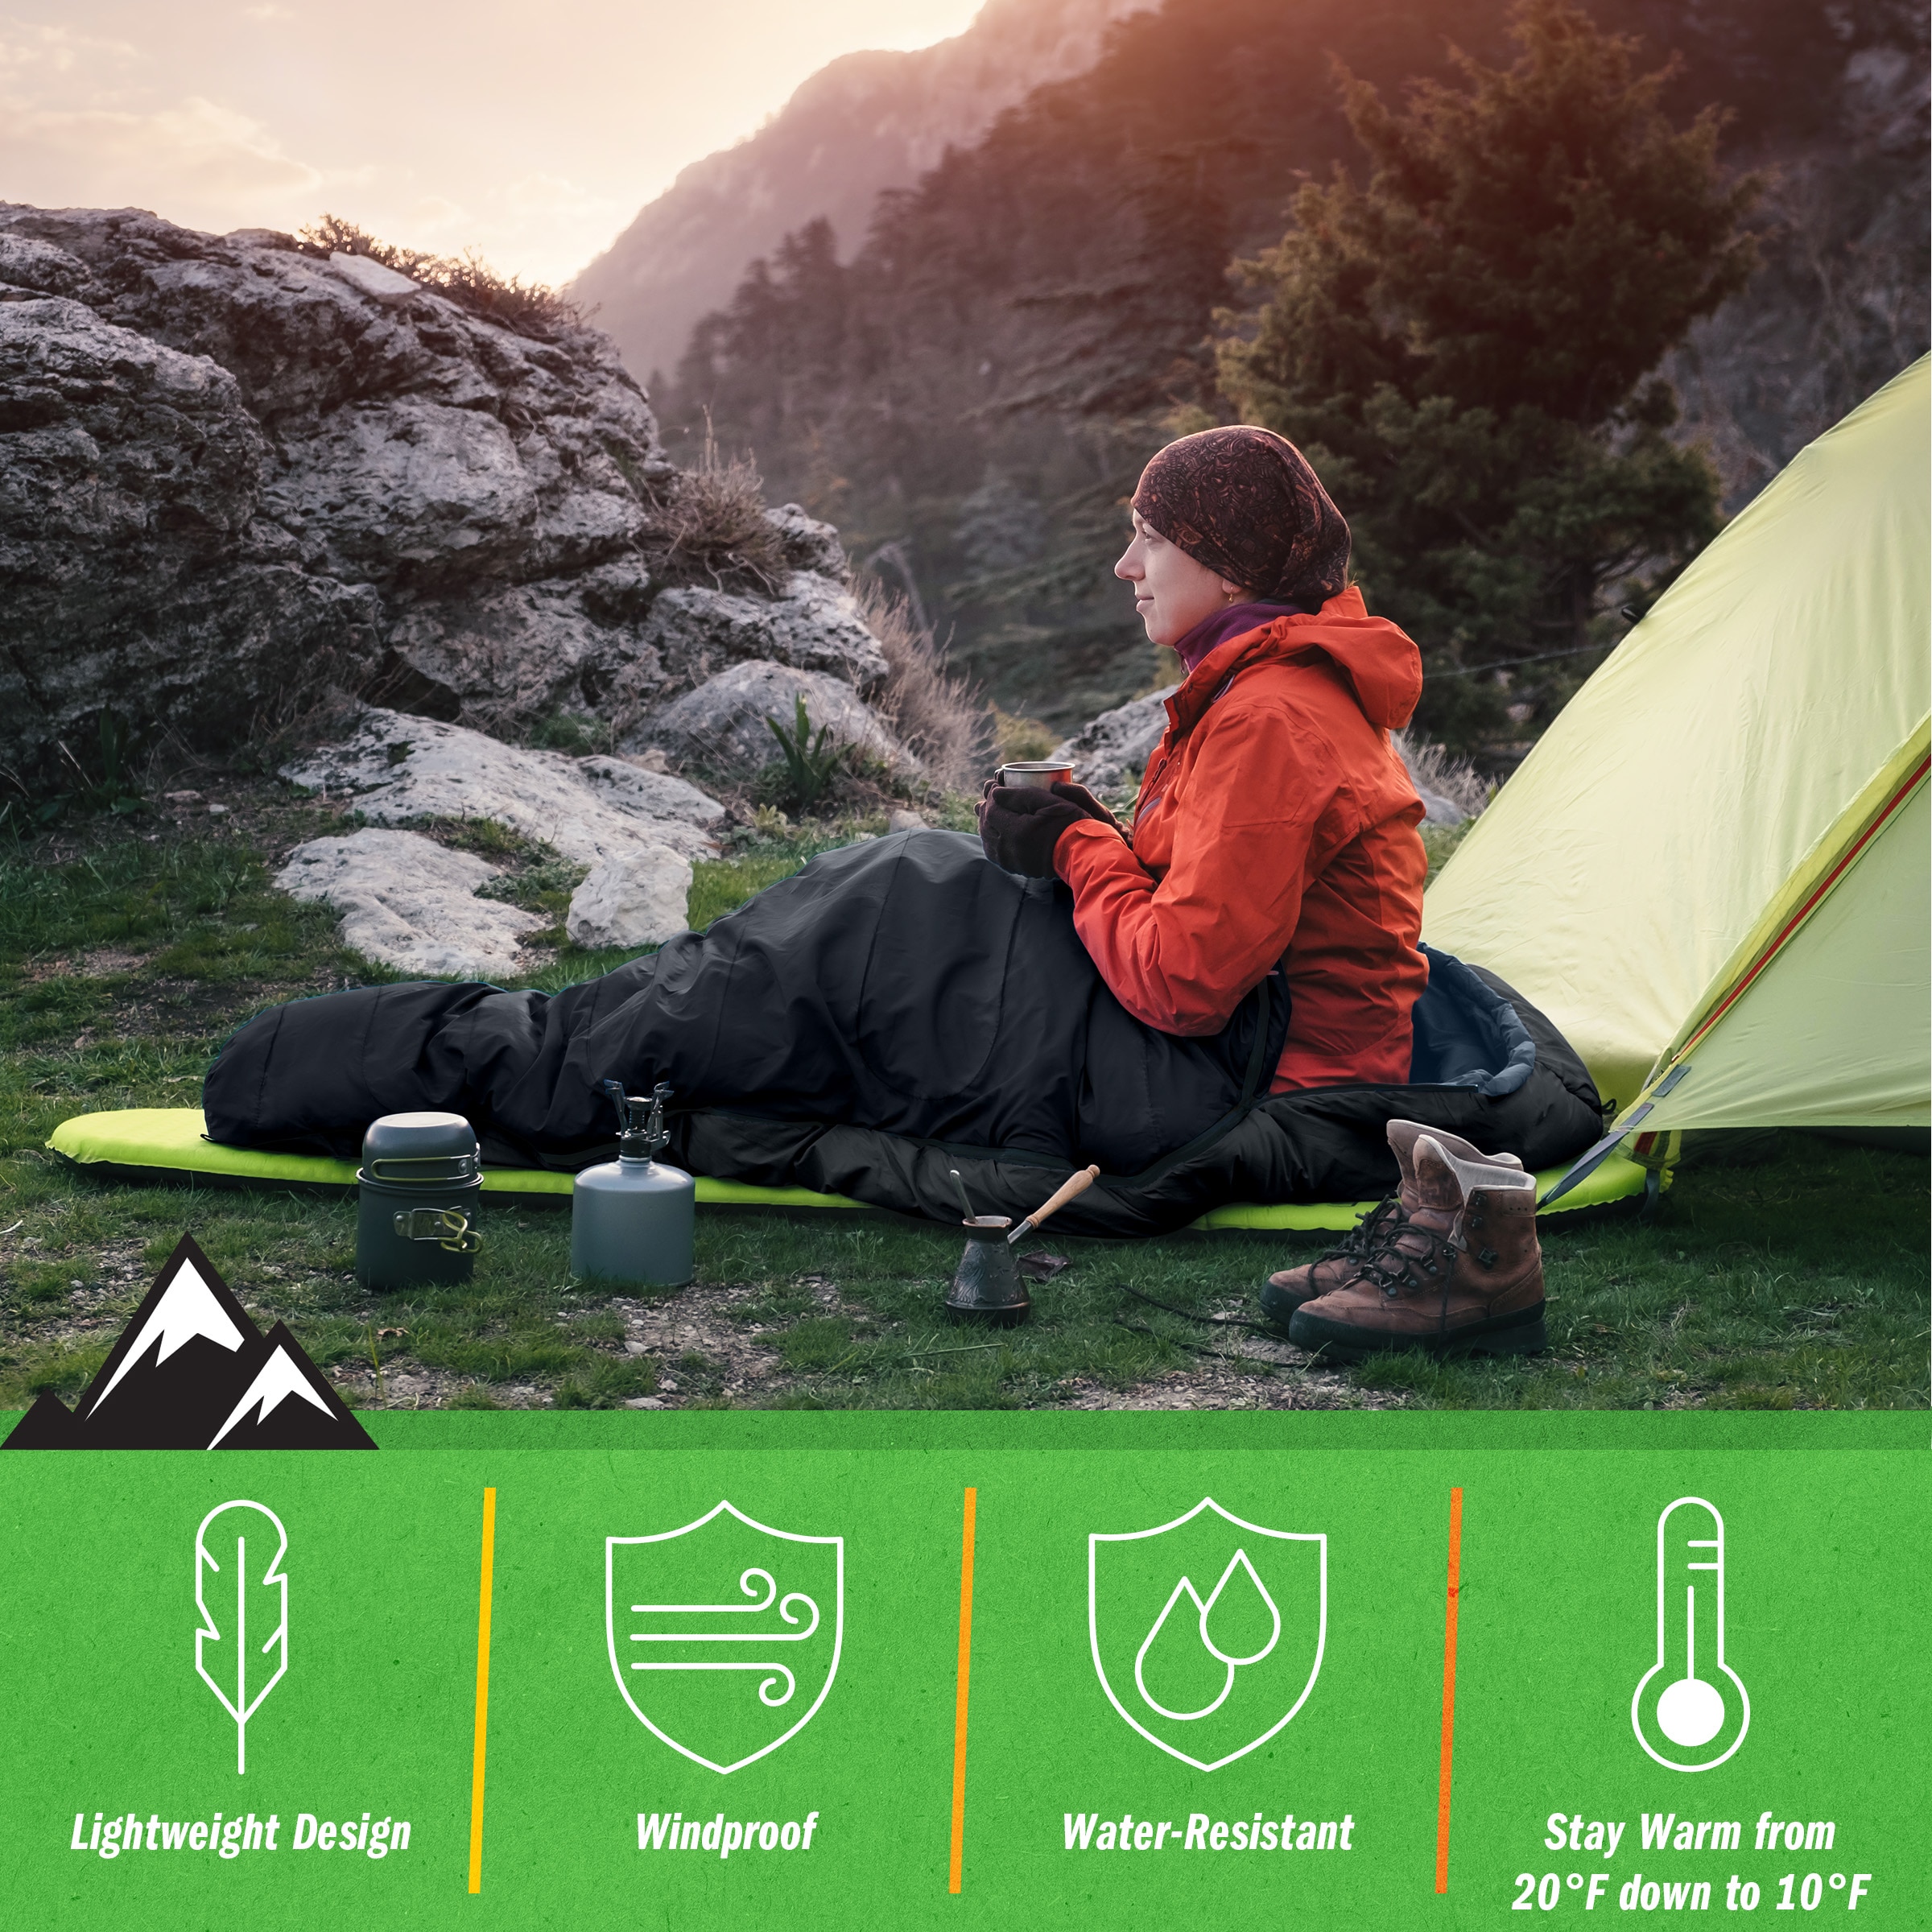 Sleeping Bag-Lightweight, Carrying Bag with Compression Straps  Included-Great for Adults, Kids, Camping, Backpacking, Sleepovers by  Wakeman Outdoors 